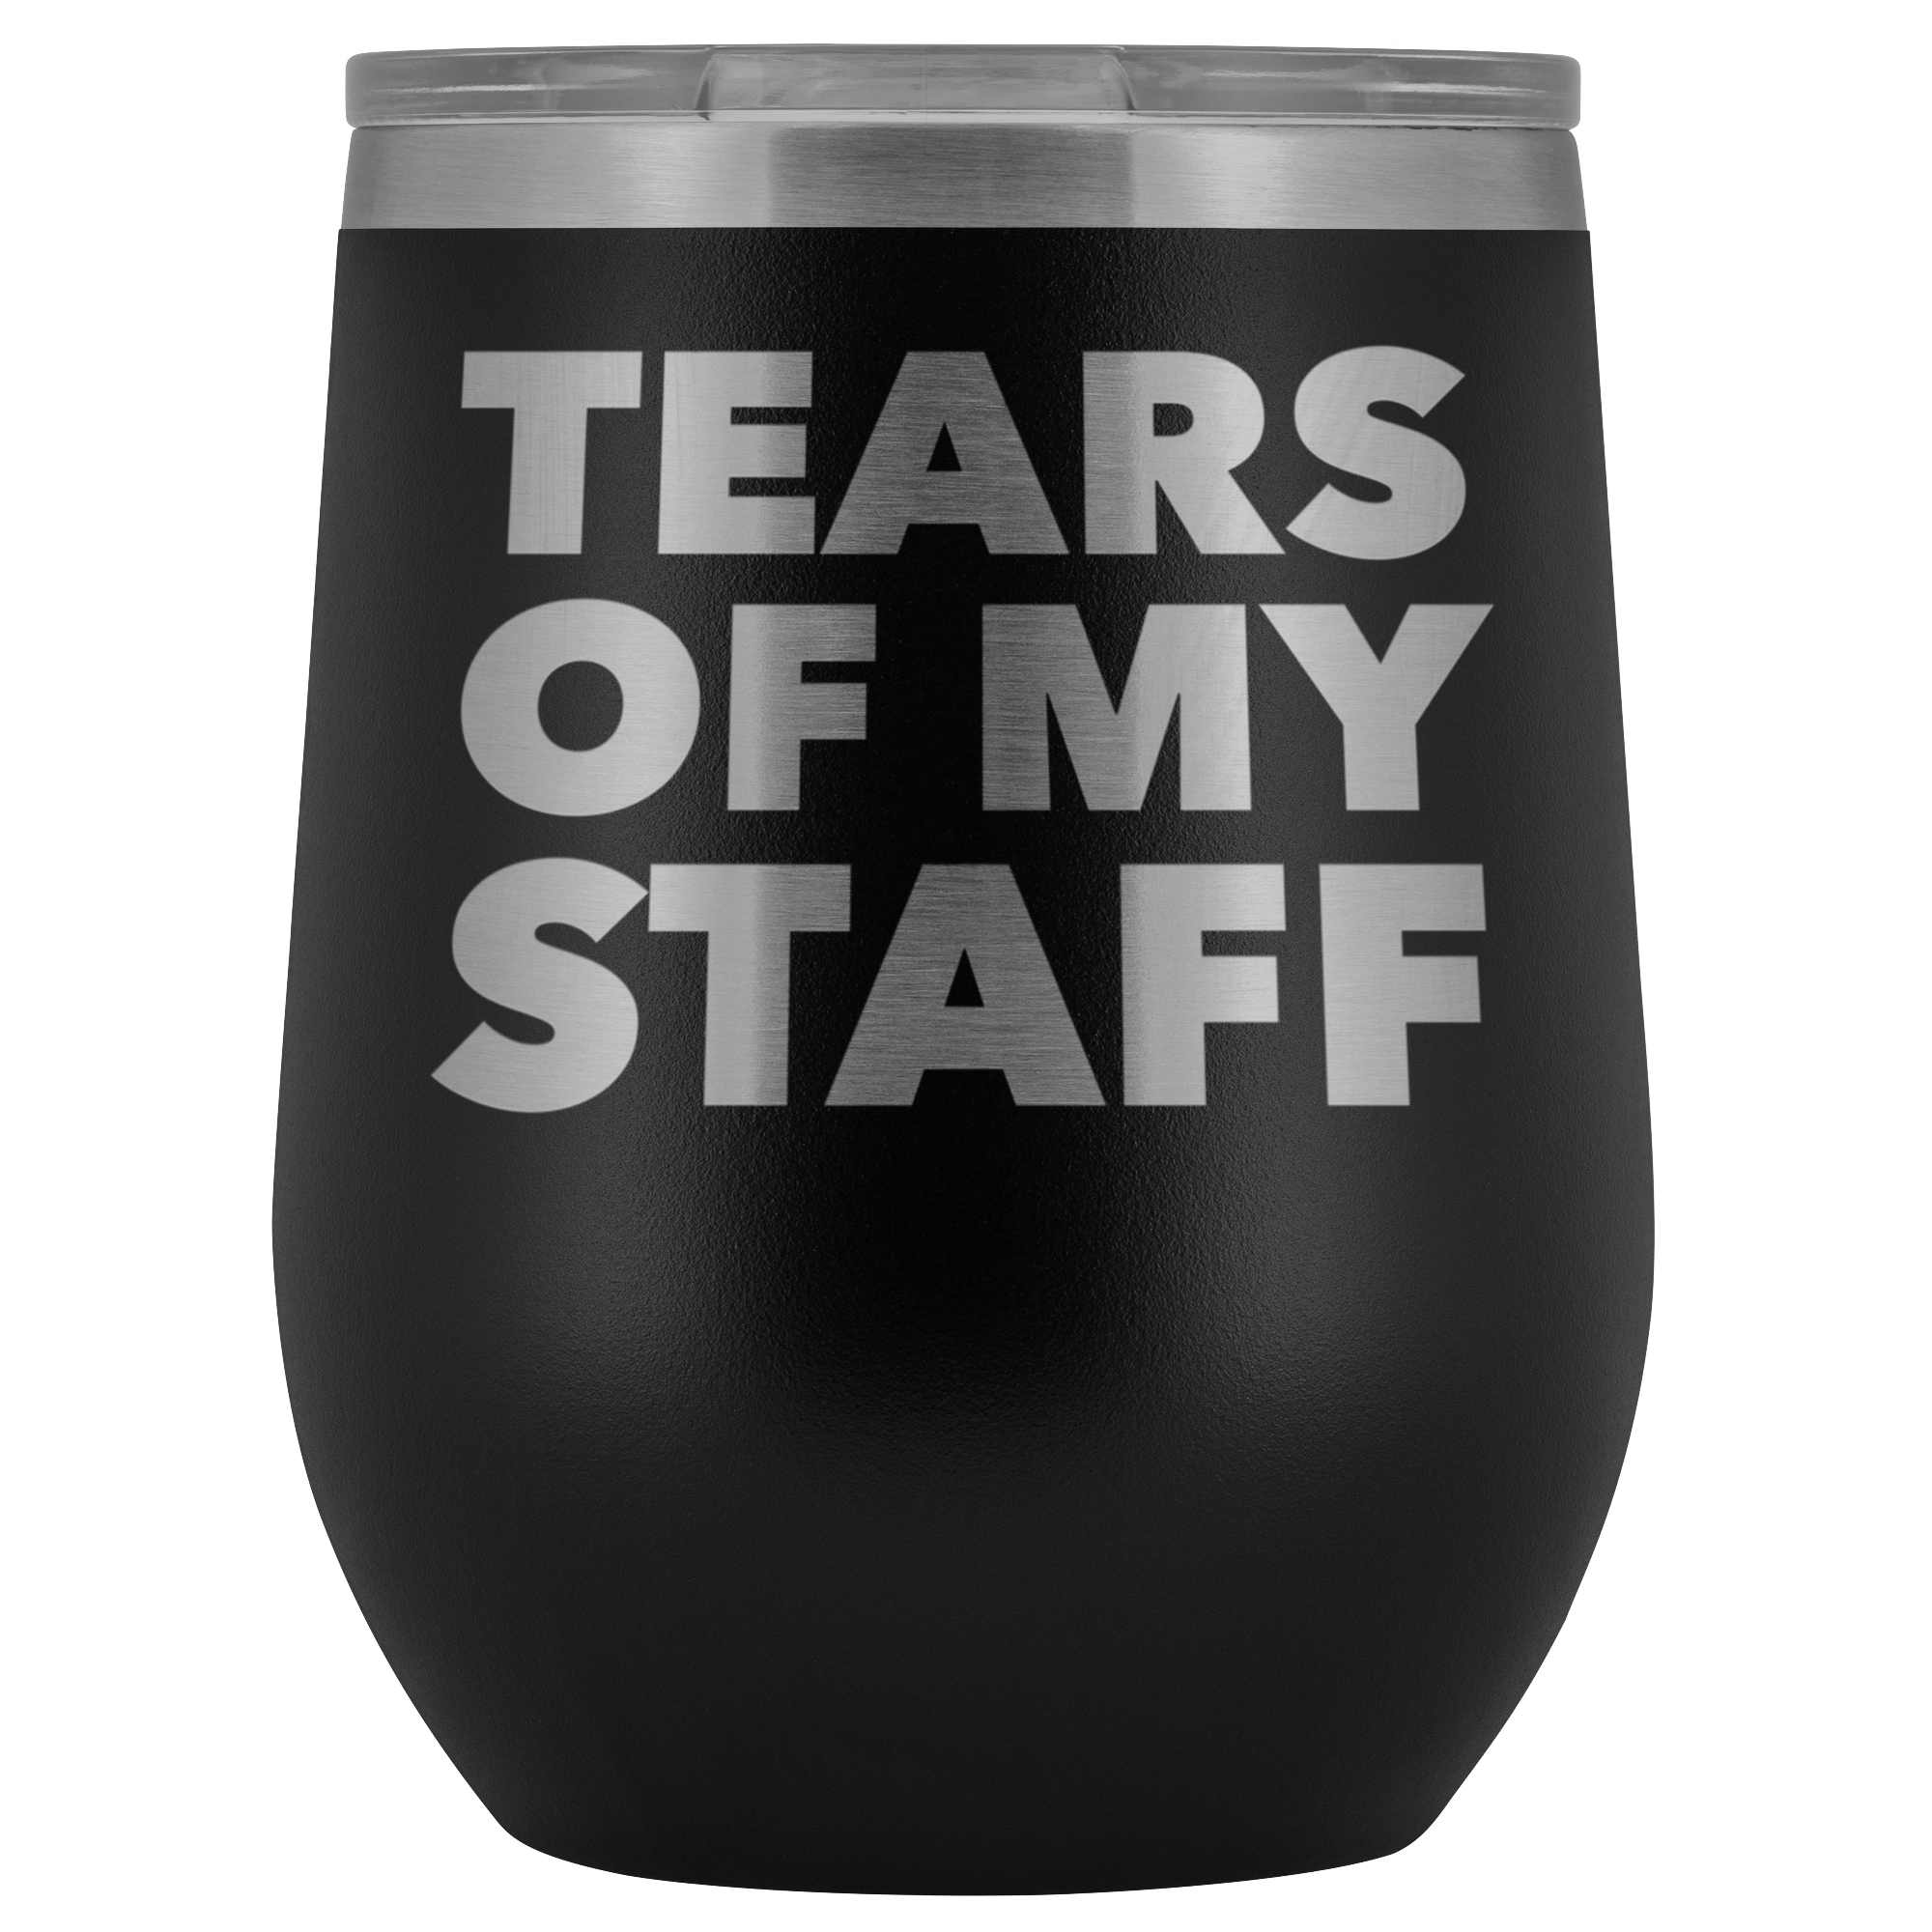 Tears of My Staff Wine Tumbler Funny Boss Mug Gifts for Boss Appreciation Day Director Stemless Insulated Cup BPA Free 12oz